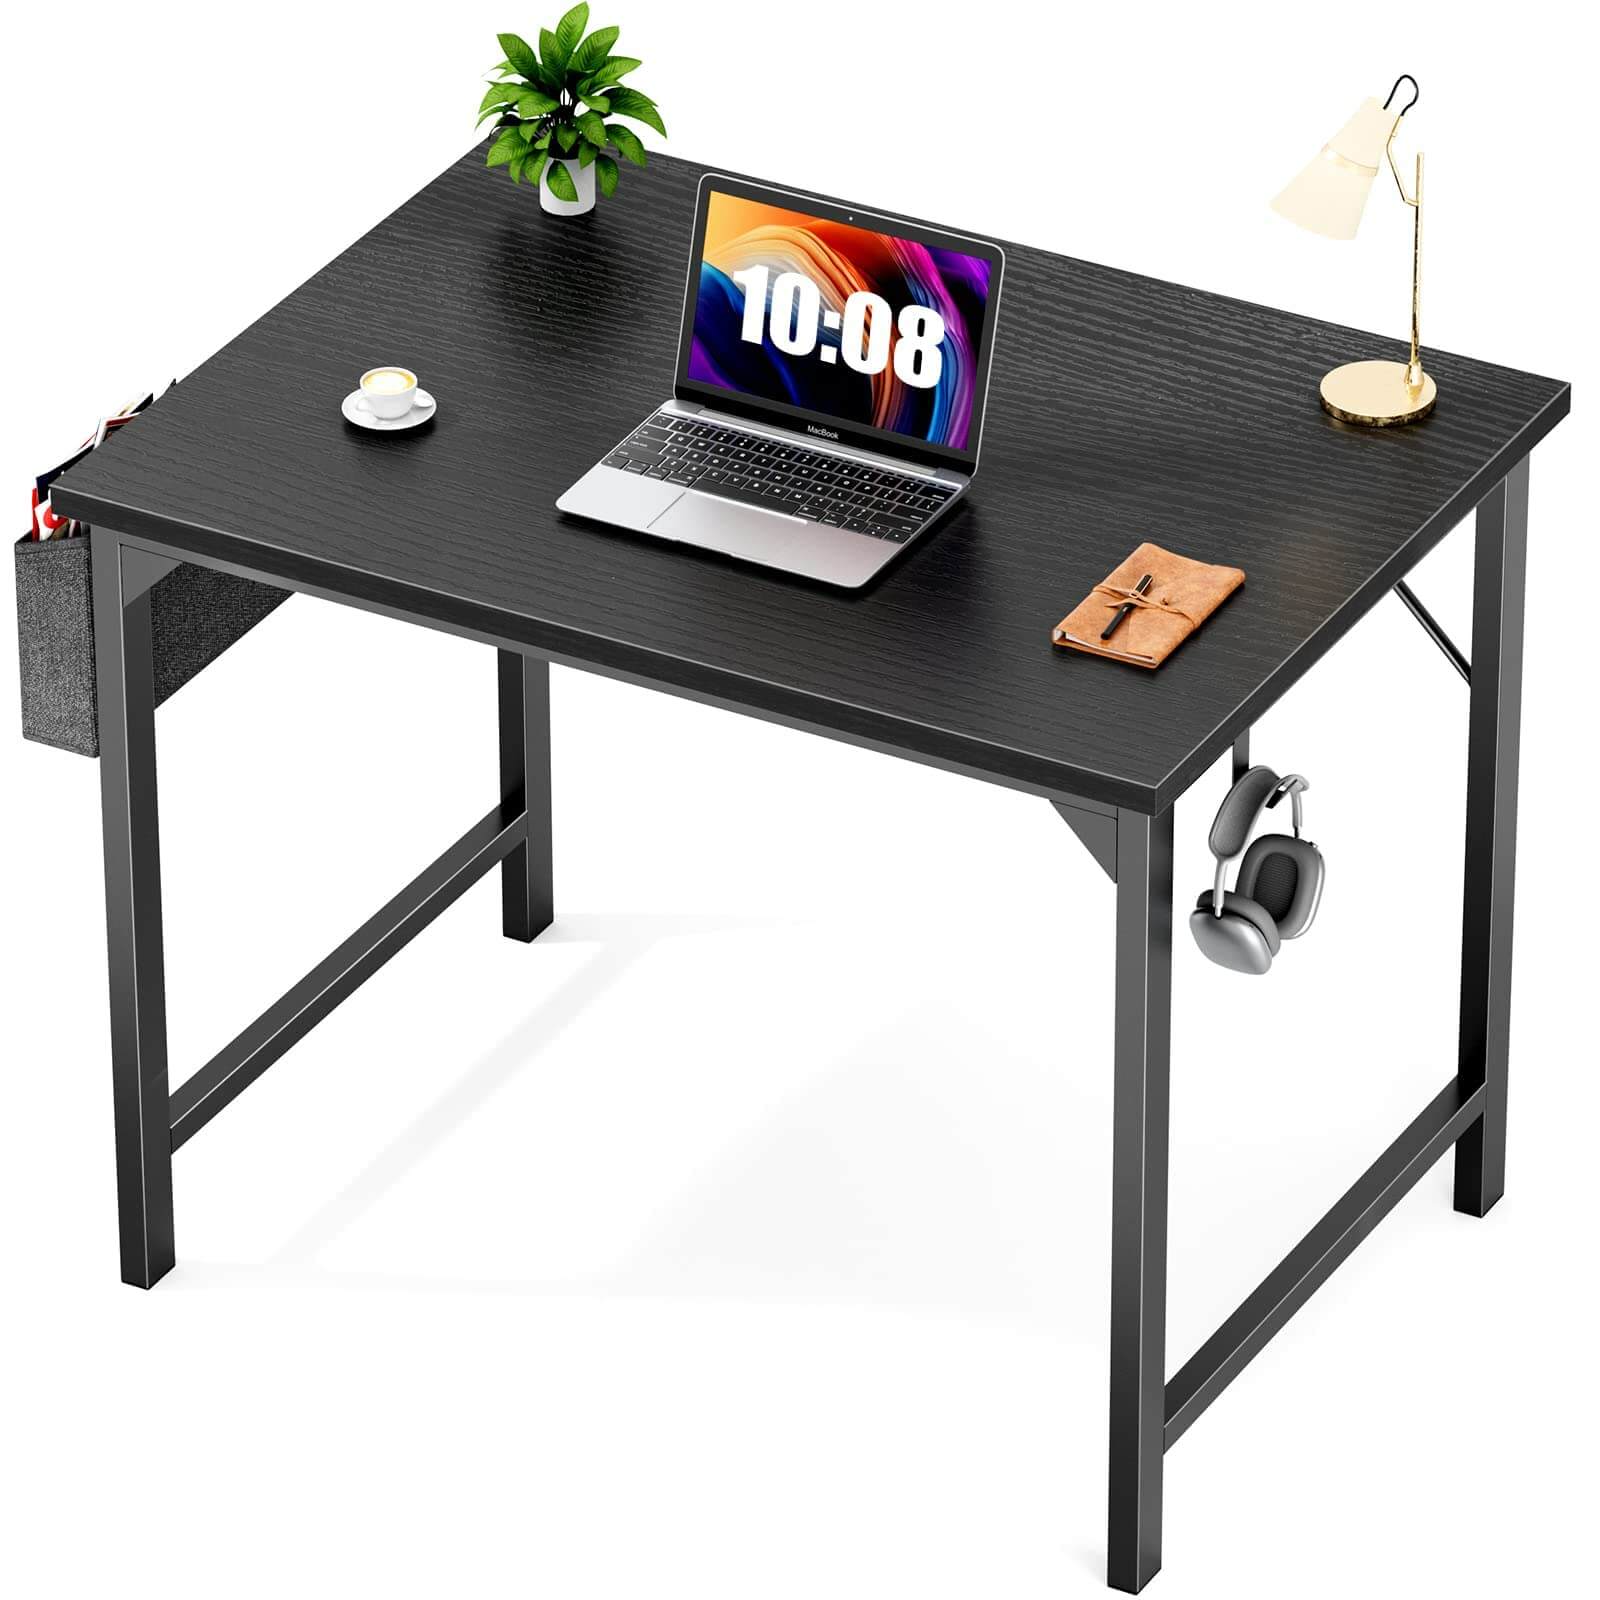 Modern Simple Style Wooden Work Office Desks with Storage Bag and Iron